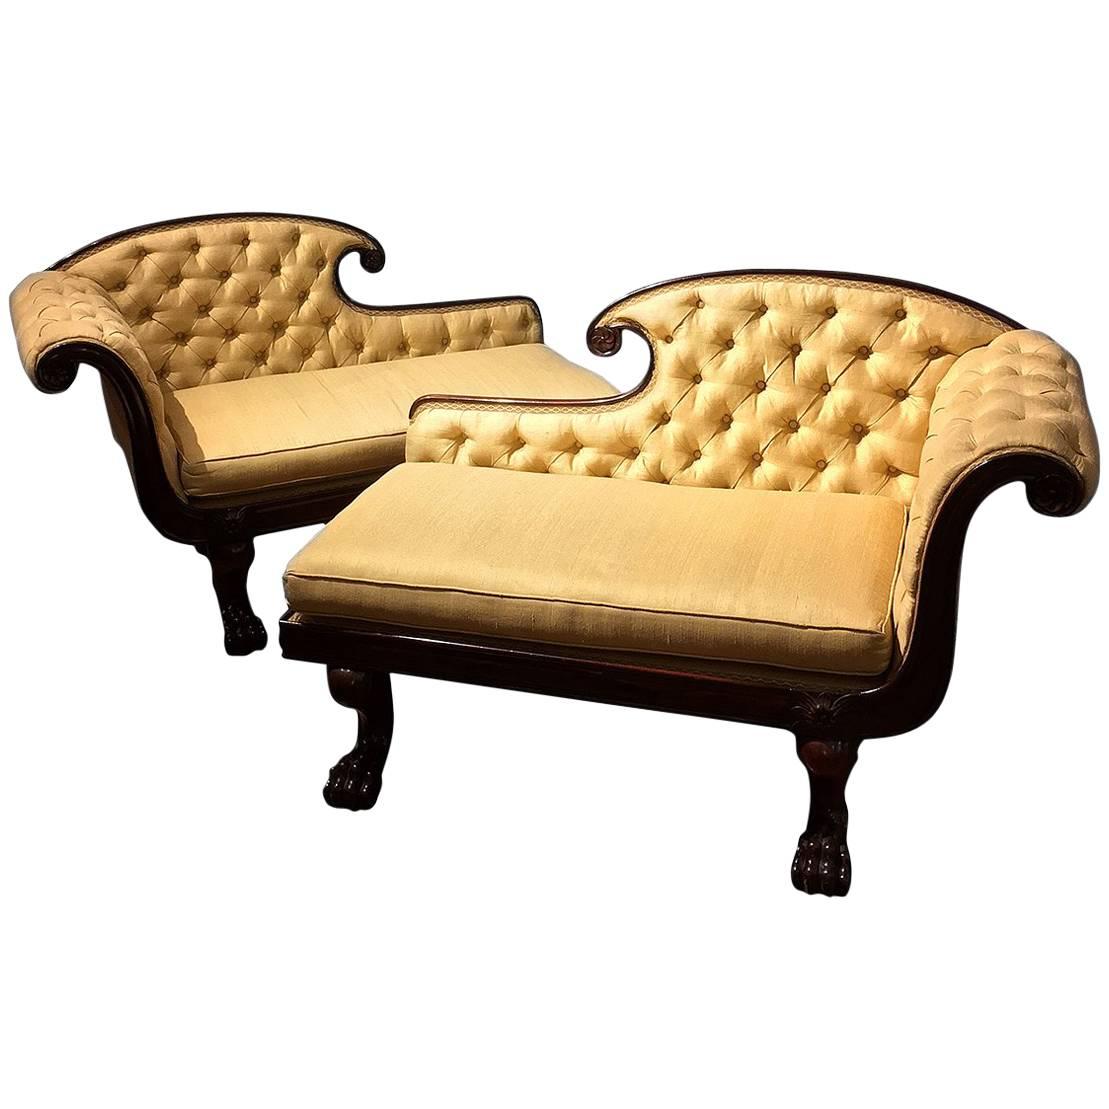 Pair of Diminutive Chaise Lounges in the Méridienne or "Fainting Couch" Style